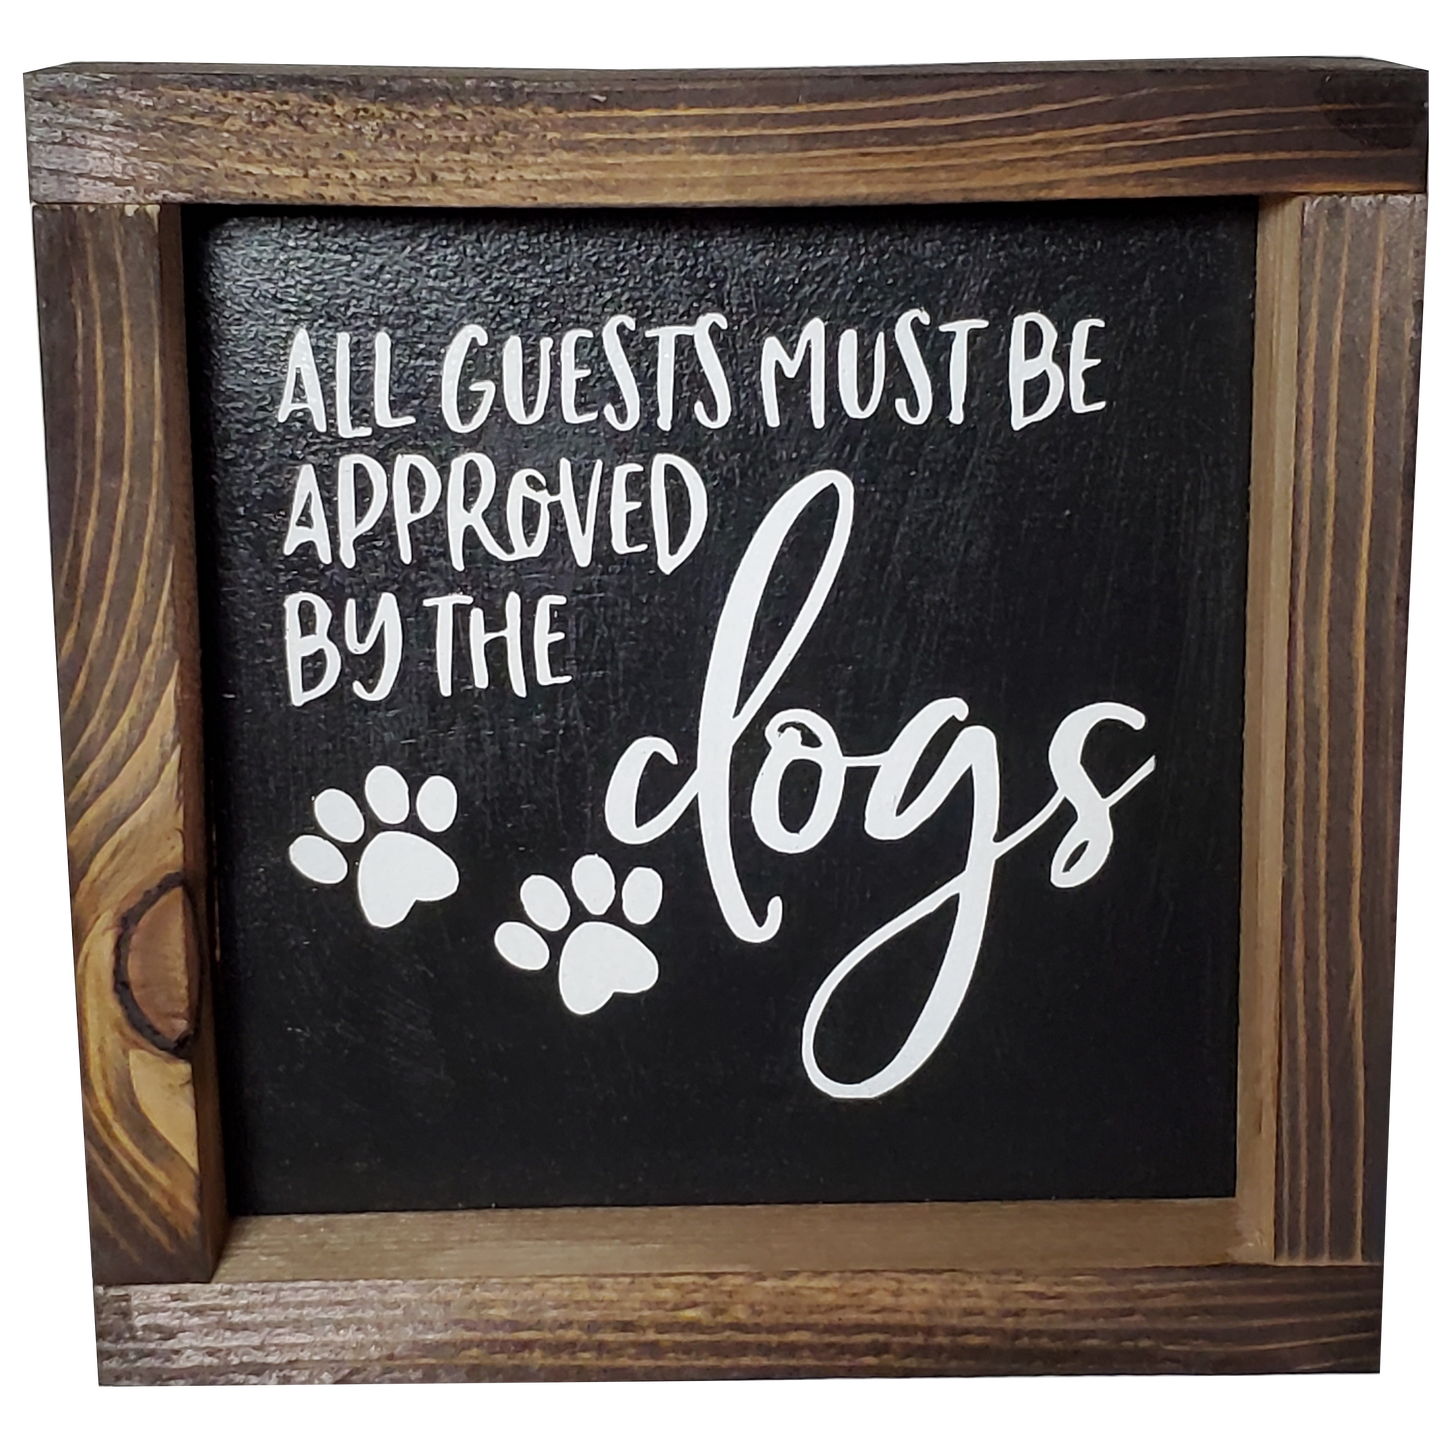 Dog-themed Sign with Distressed Farmhouse Finish - All Guests Must be Approved by the Dogs